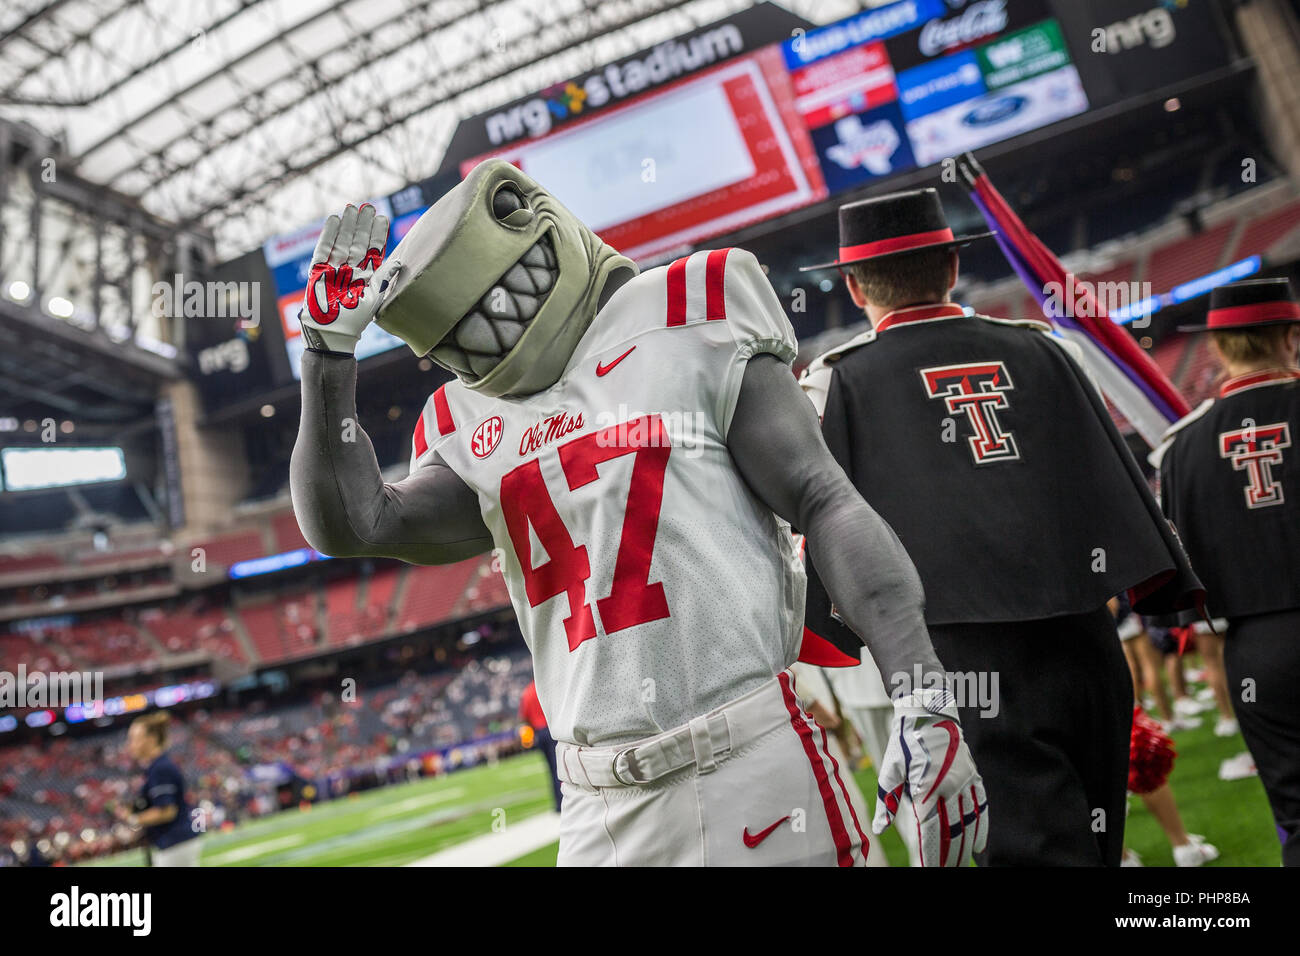 Houston, Texas, USA. 1st Sep, 2018. The Ole Miss Rebels mascot ''Landshark Tony'' makes a shark fin gesture during the NCAA football game between the Texas Tech Red Raiders and the Ole Miss Rebels in the 2018 AdvoCare Texas Kickoff at NRG Stadium in Houston, Texas. Prentice C. James/CSM/Alamy Live News Stock Photo